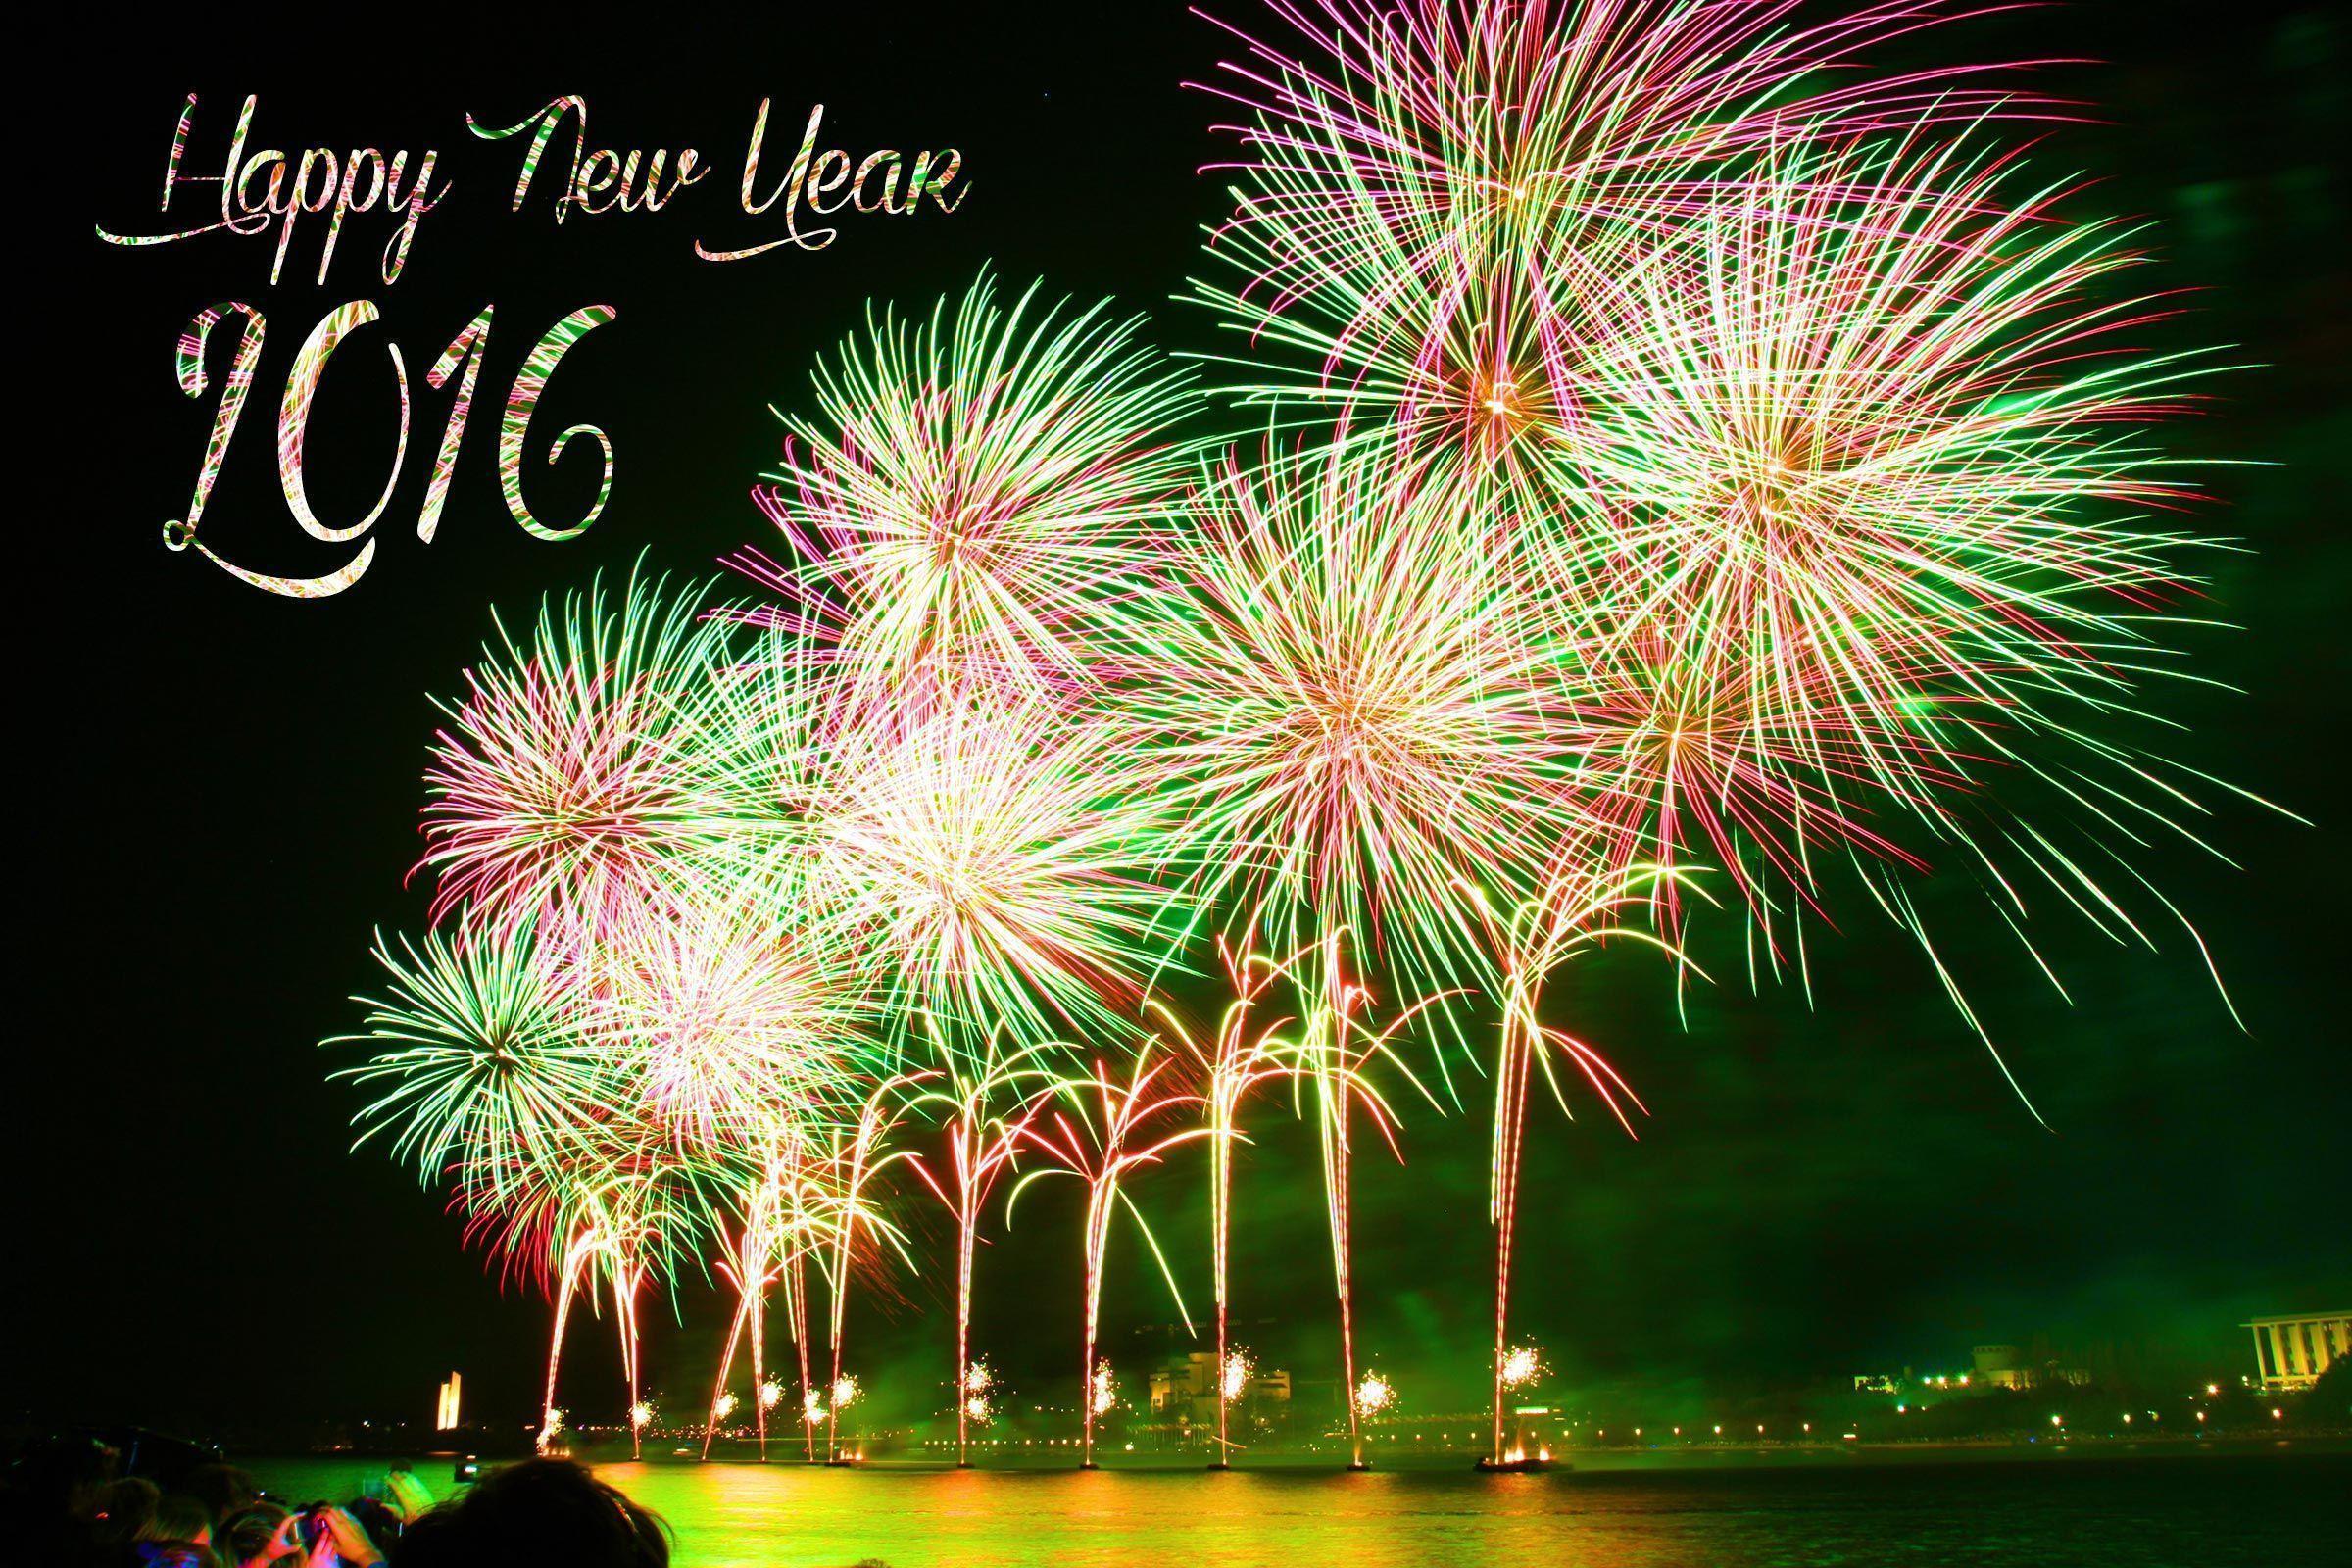 Happy New Year 2016 Wallpaper HD, Image & Facebook Cover photo